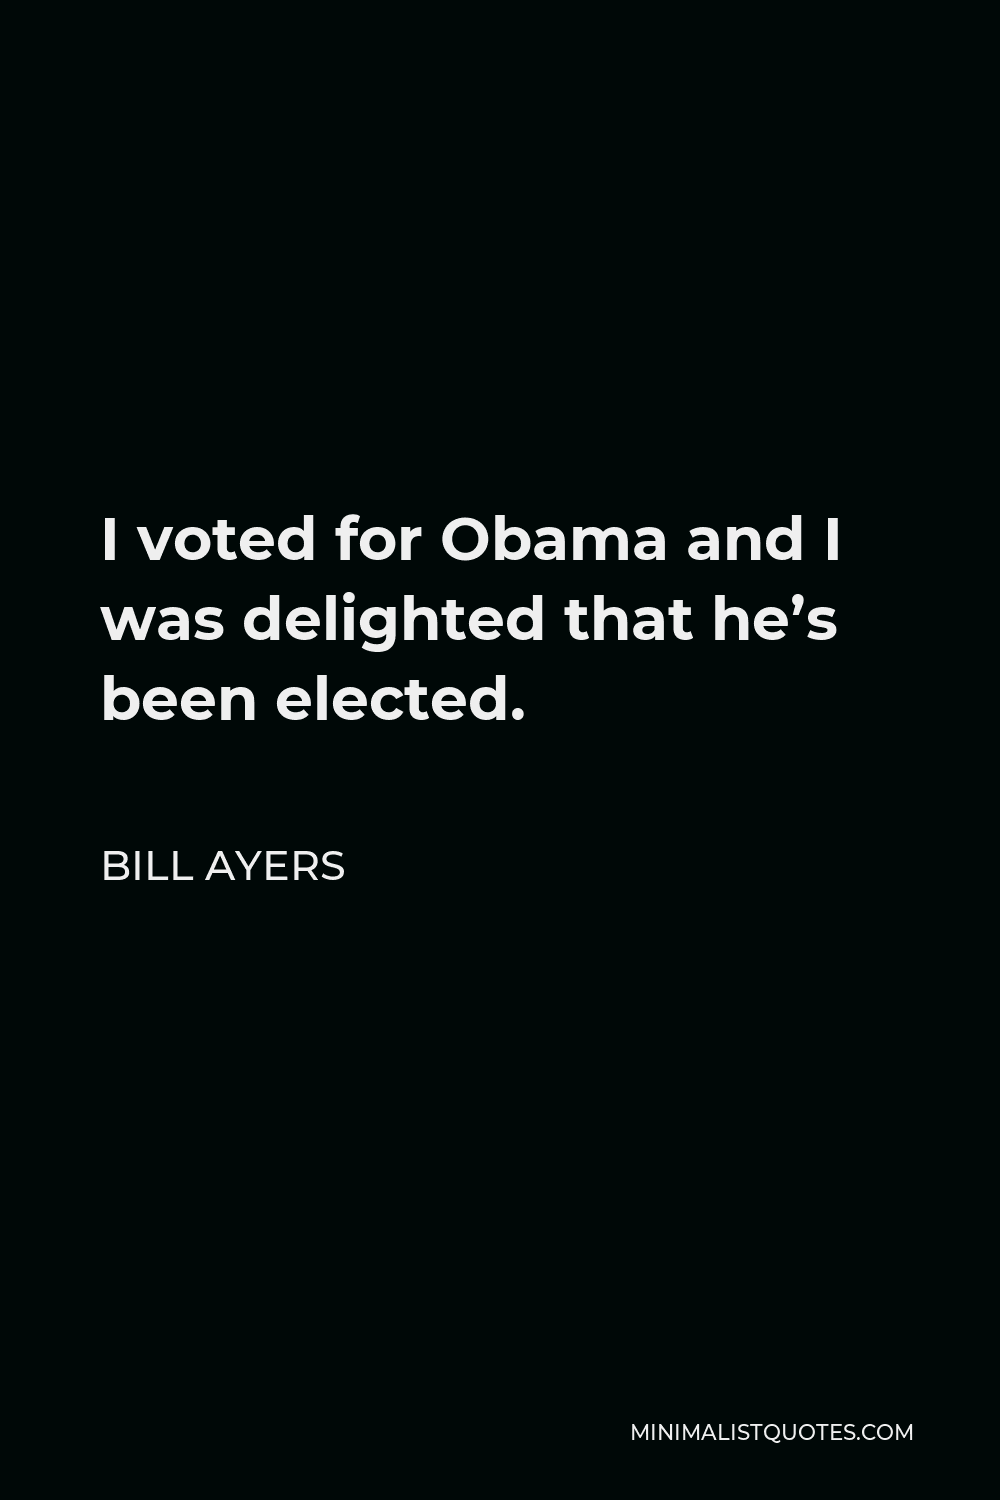 Bill Ayers Quote - I voted for Obama and I was delighted that he’s been elected.